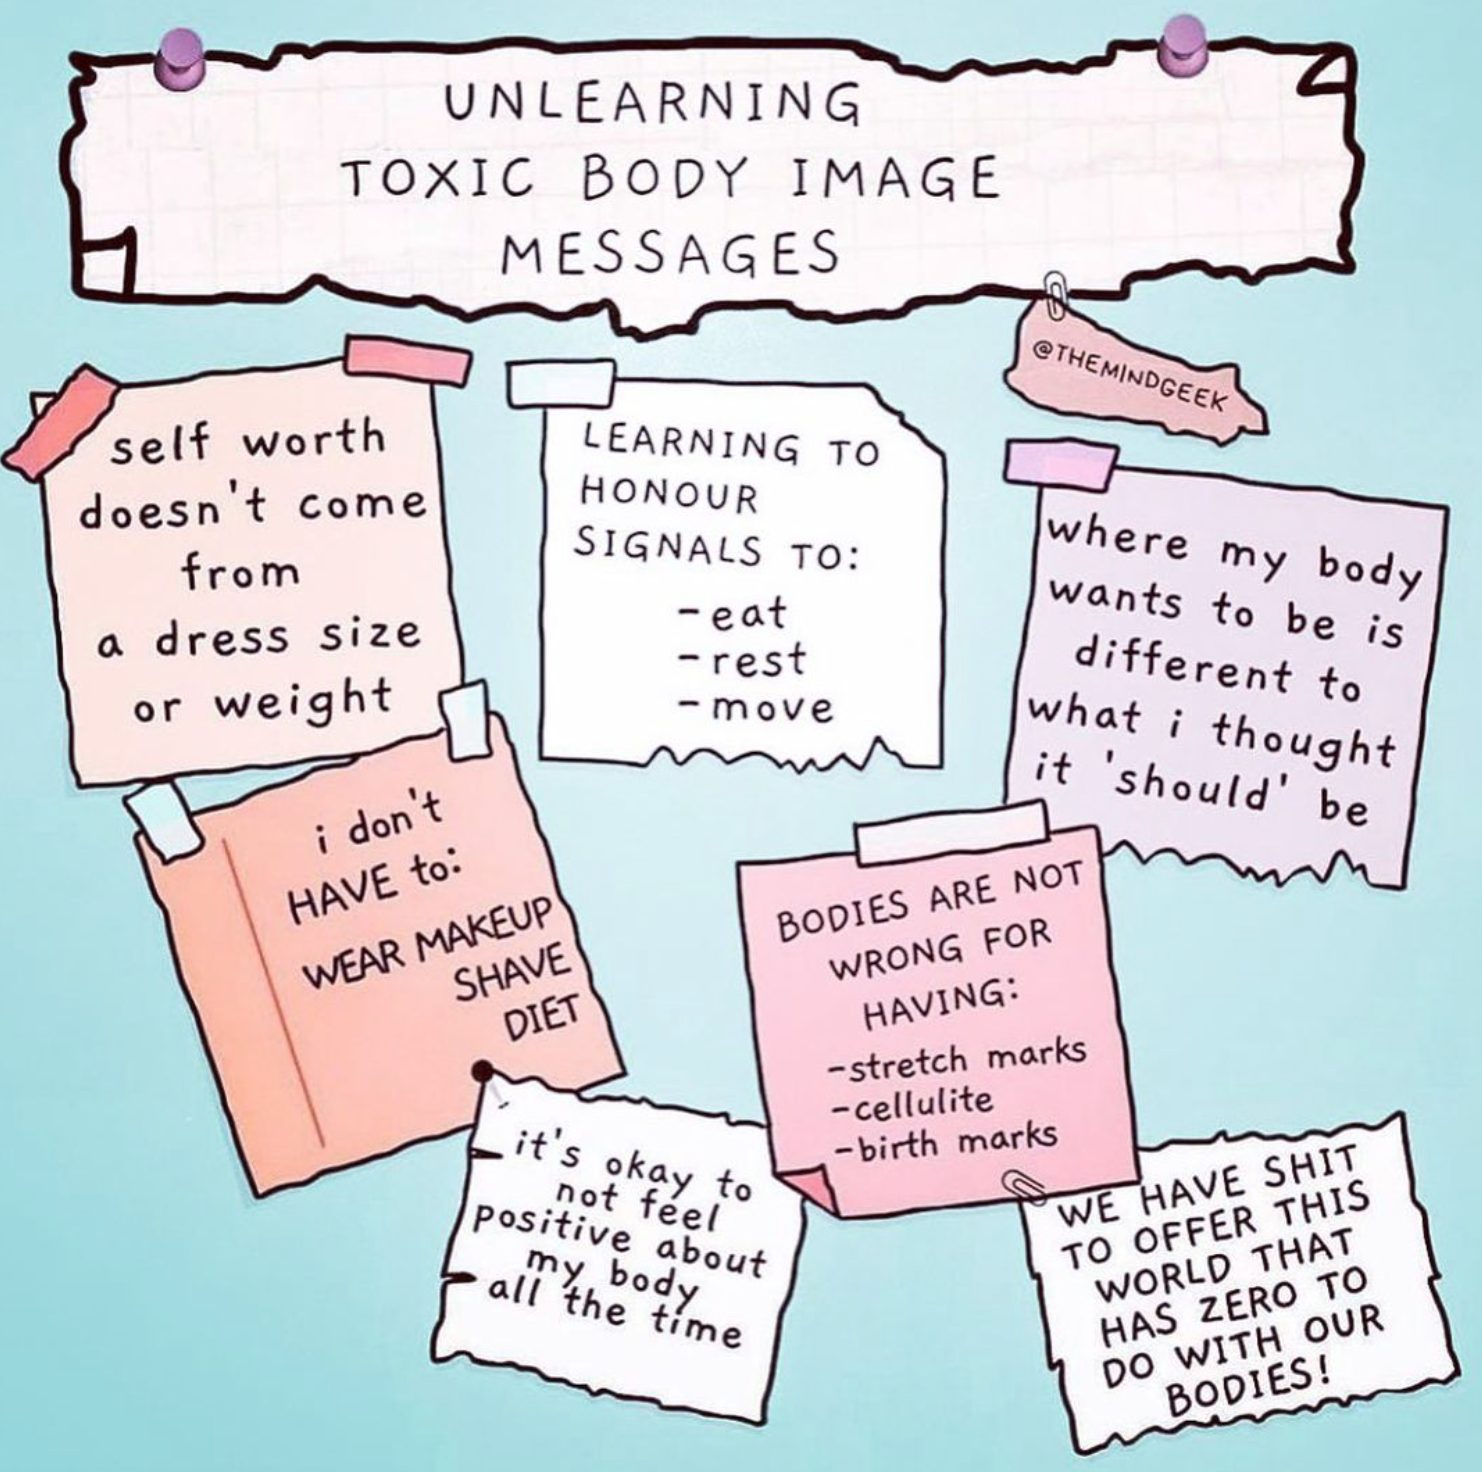 Healthy body image messages